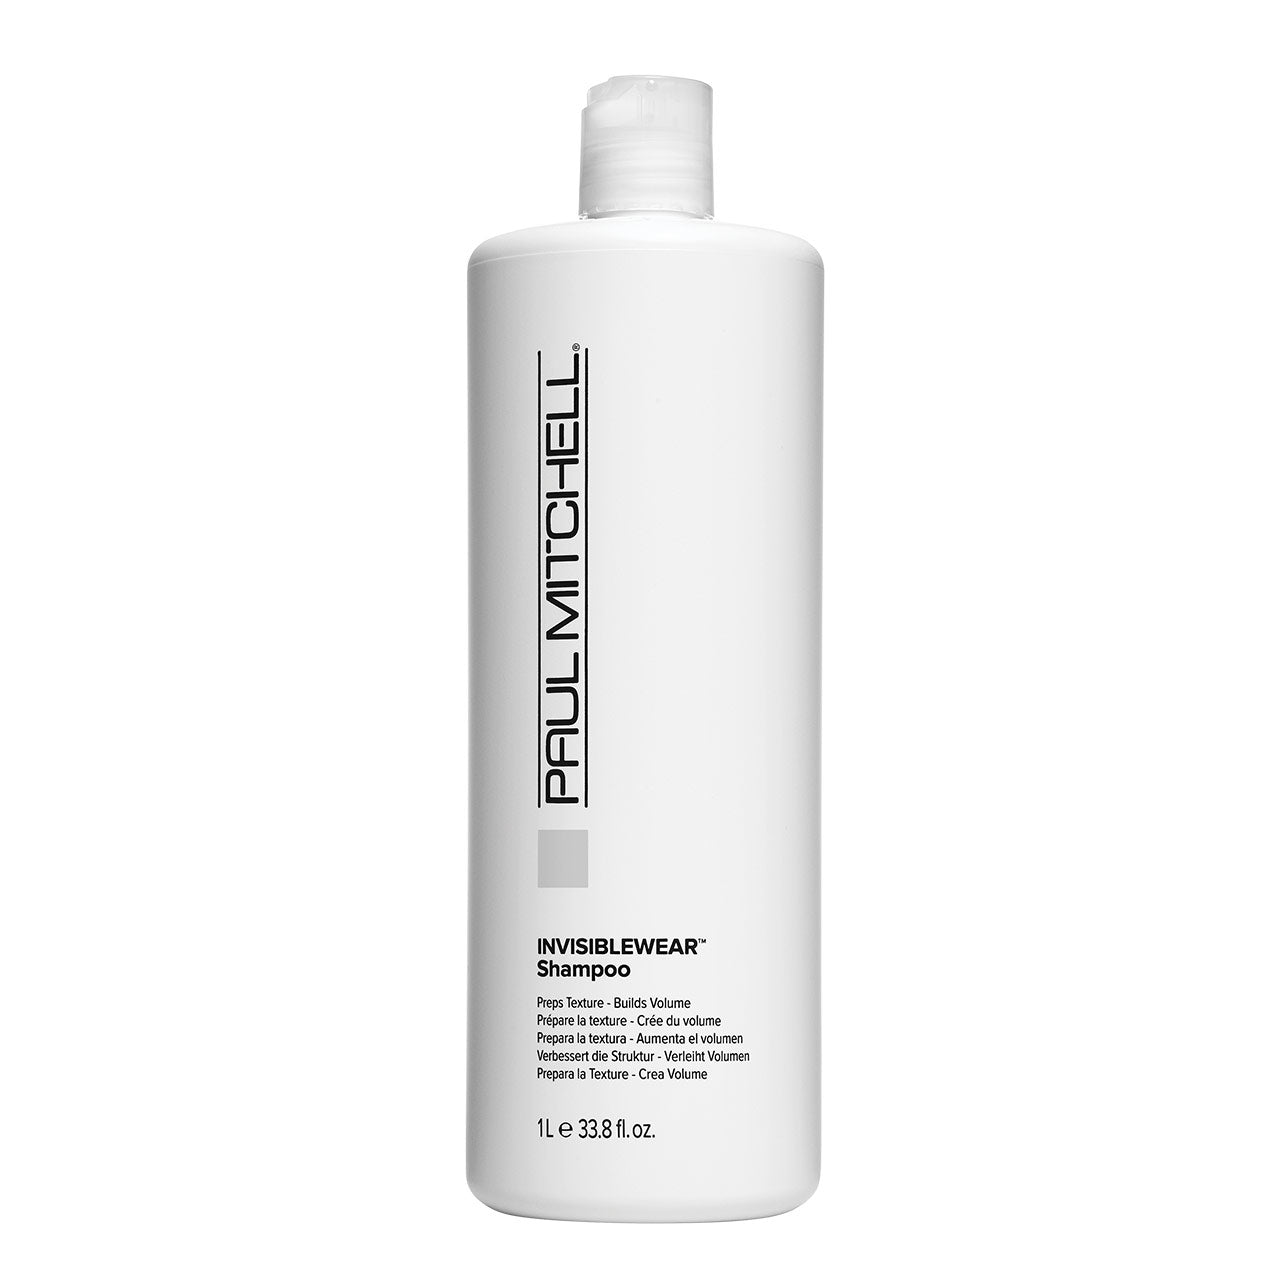 Invisiblewear Shampoo - 1L - by Paul Mitchell |ProCare Outlet|